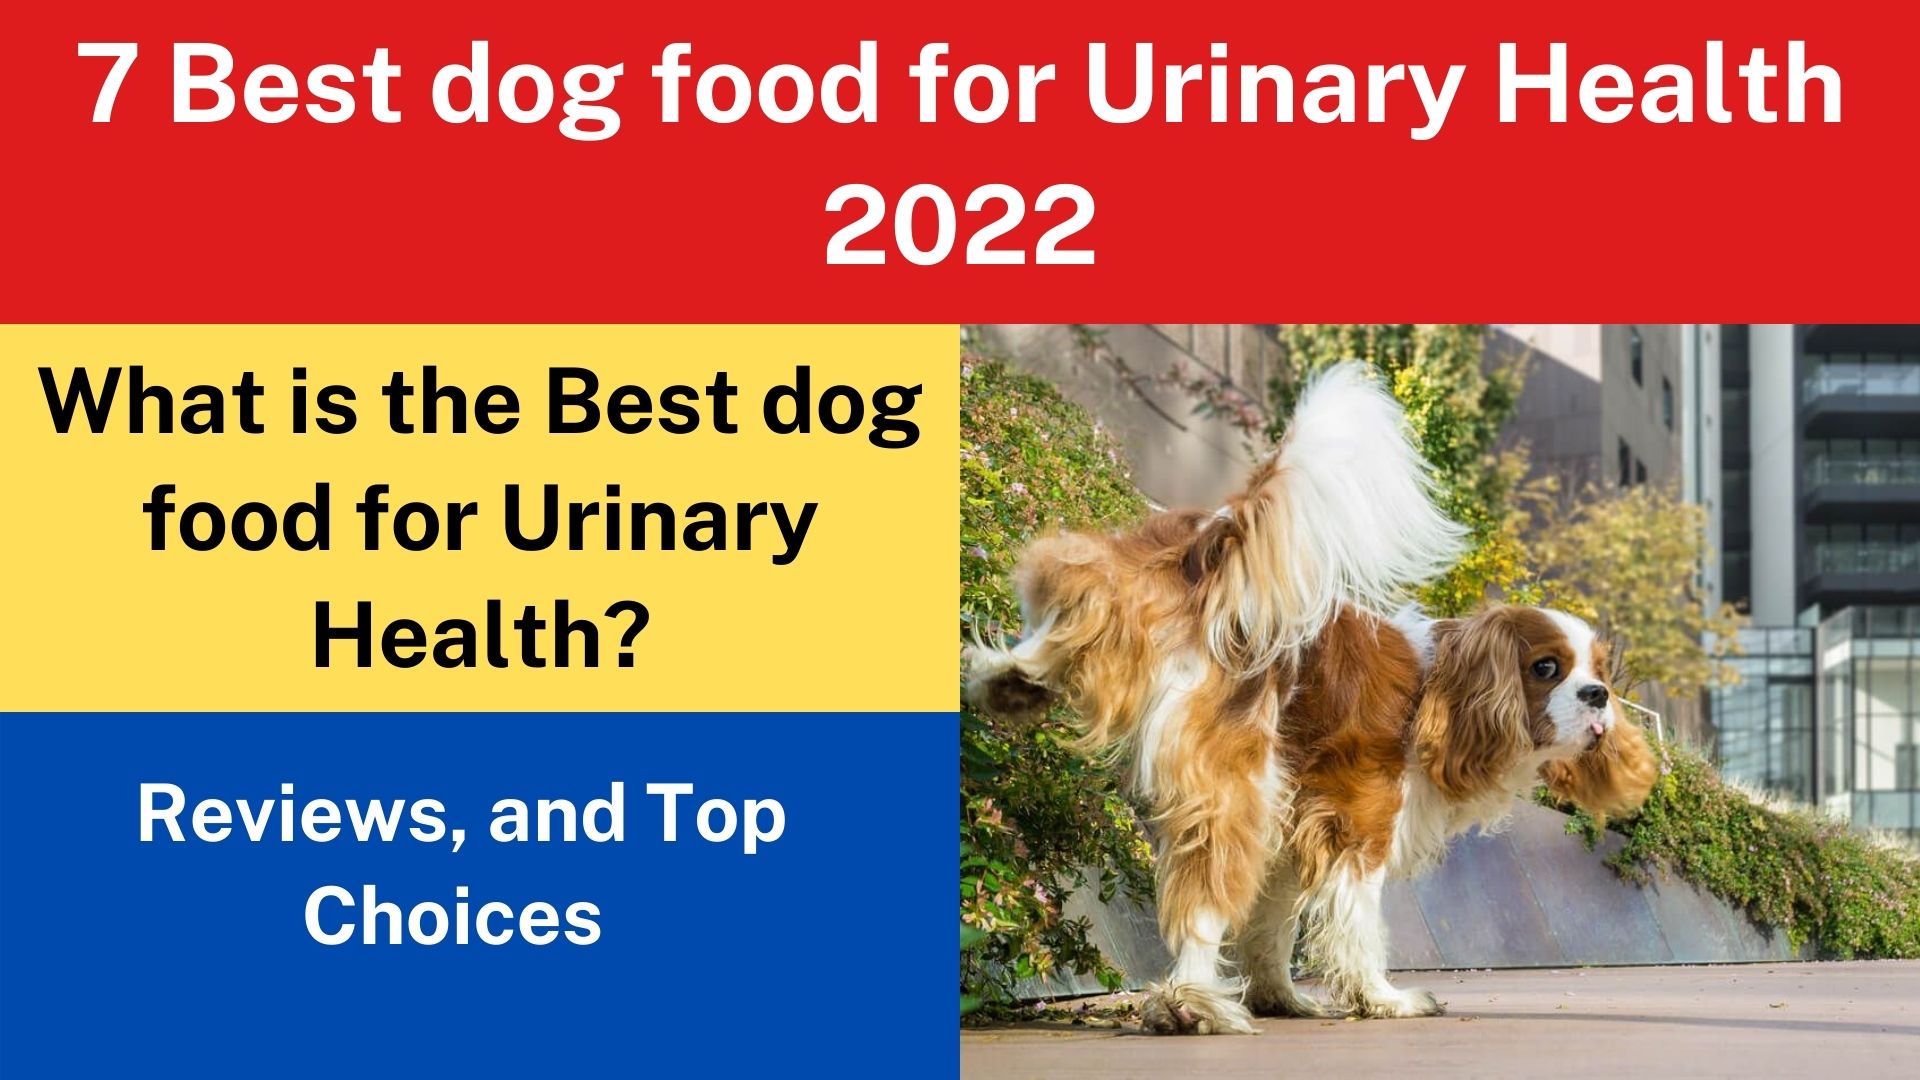 7 Best dog food for Urinary Health